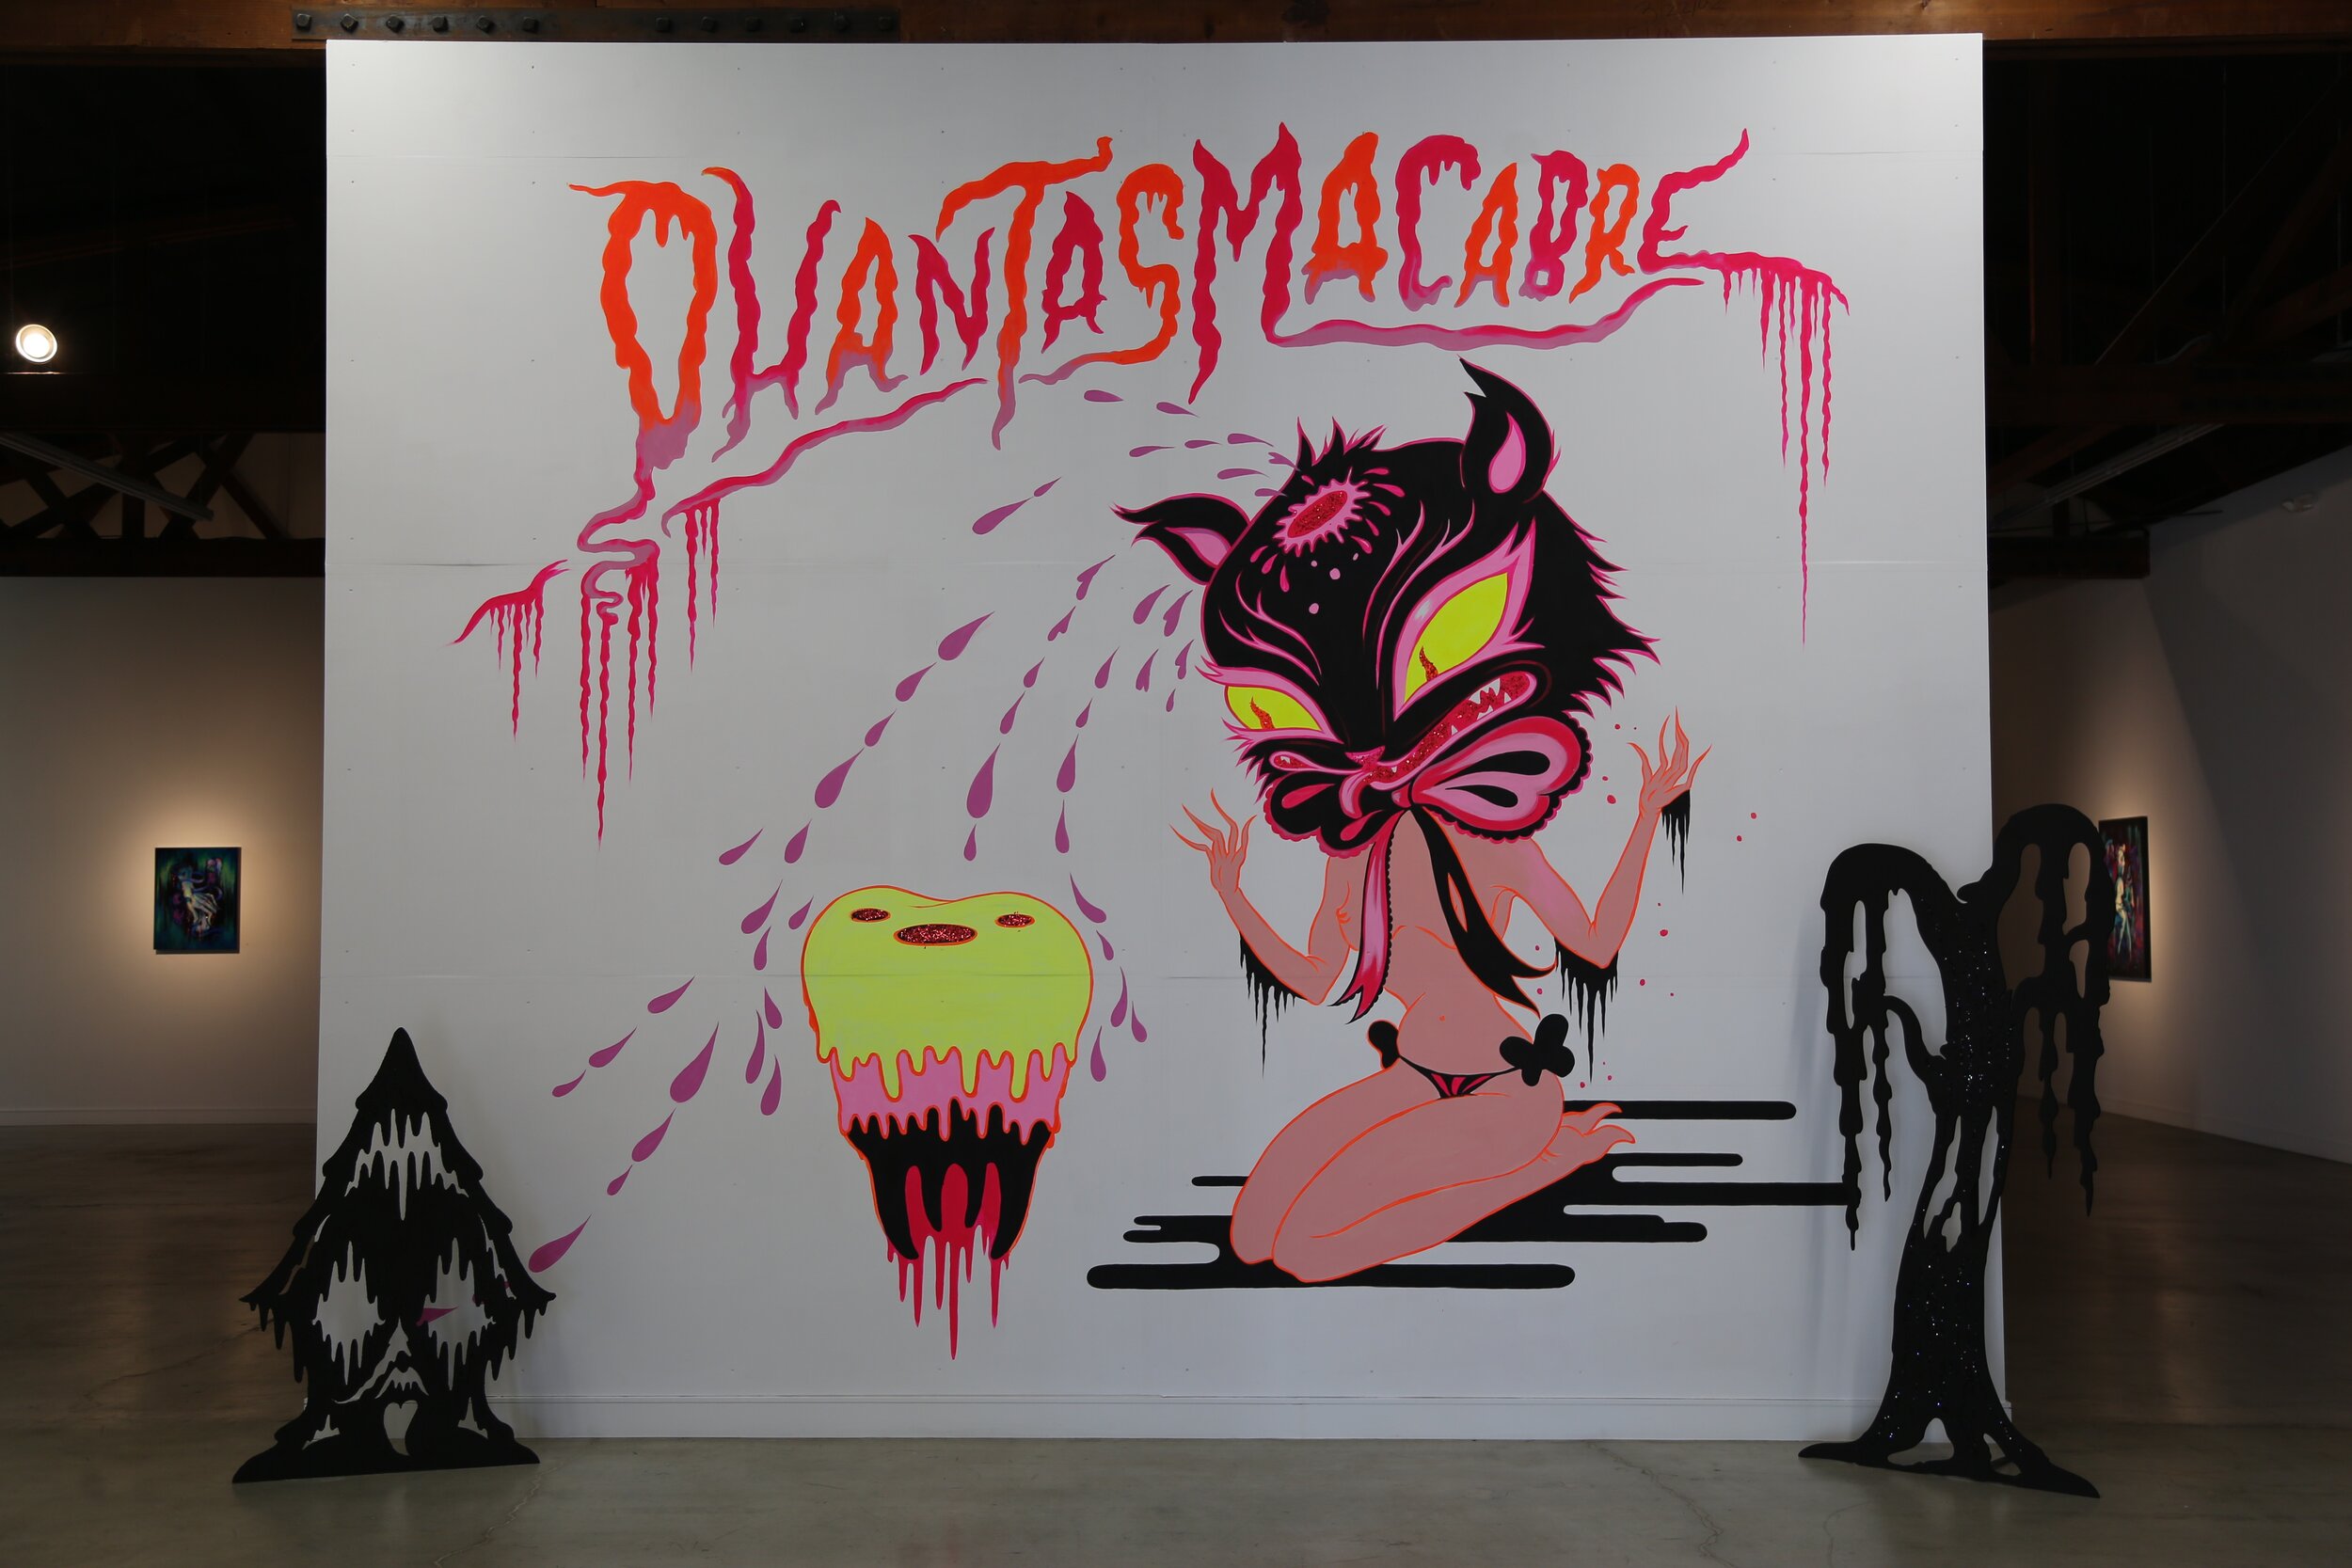 Camille Rose Garcia's 'Phantasmacabre' exhibition at Corey Helford Gallery in Downtown Los Angeles on July 16, 2016_photo by EMS.jpg